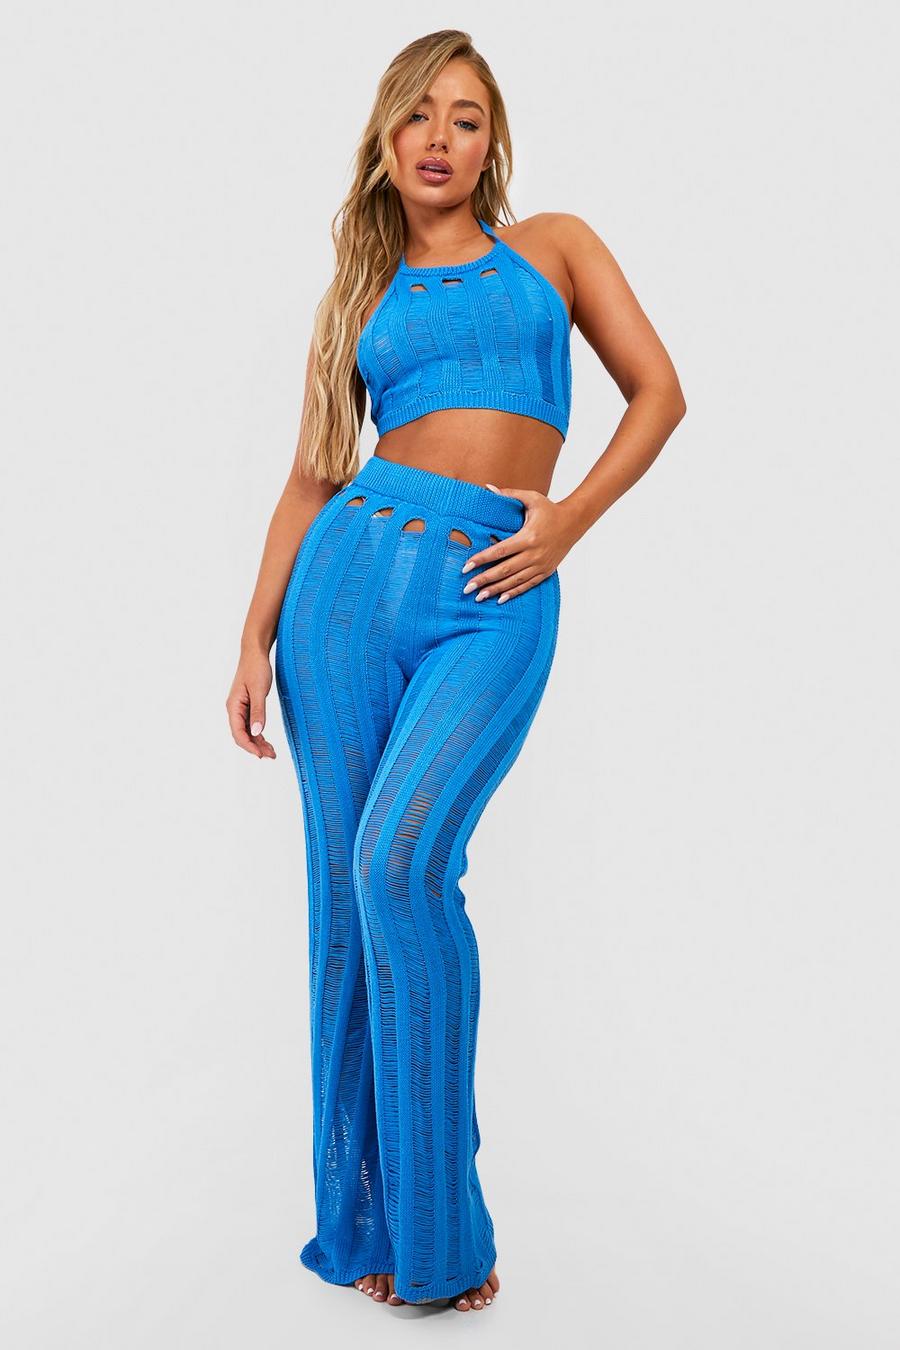 Turquoise Ladder Crochet Top & Pants Beach Two-Piece